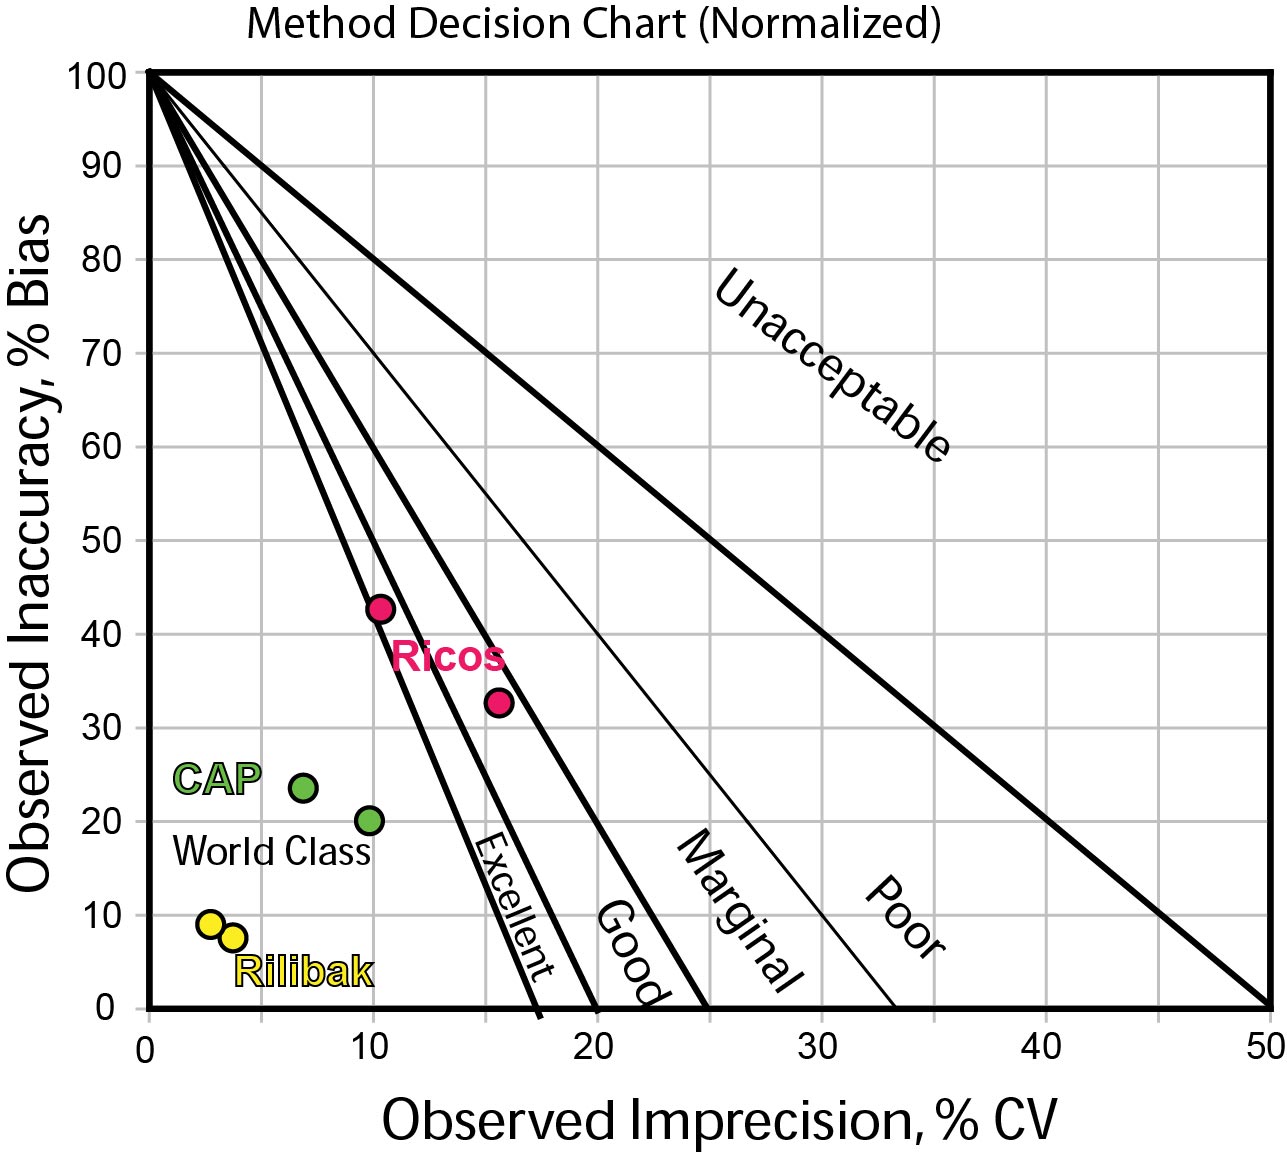 2012-ARKRAY-H8180-HbA1c Normalized Method Decision Chart